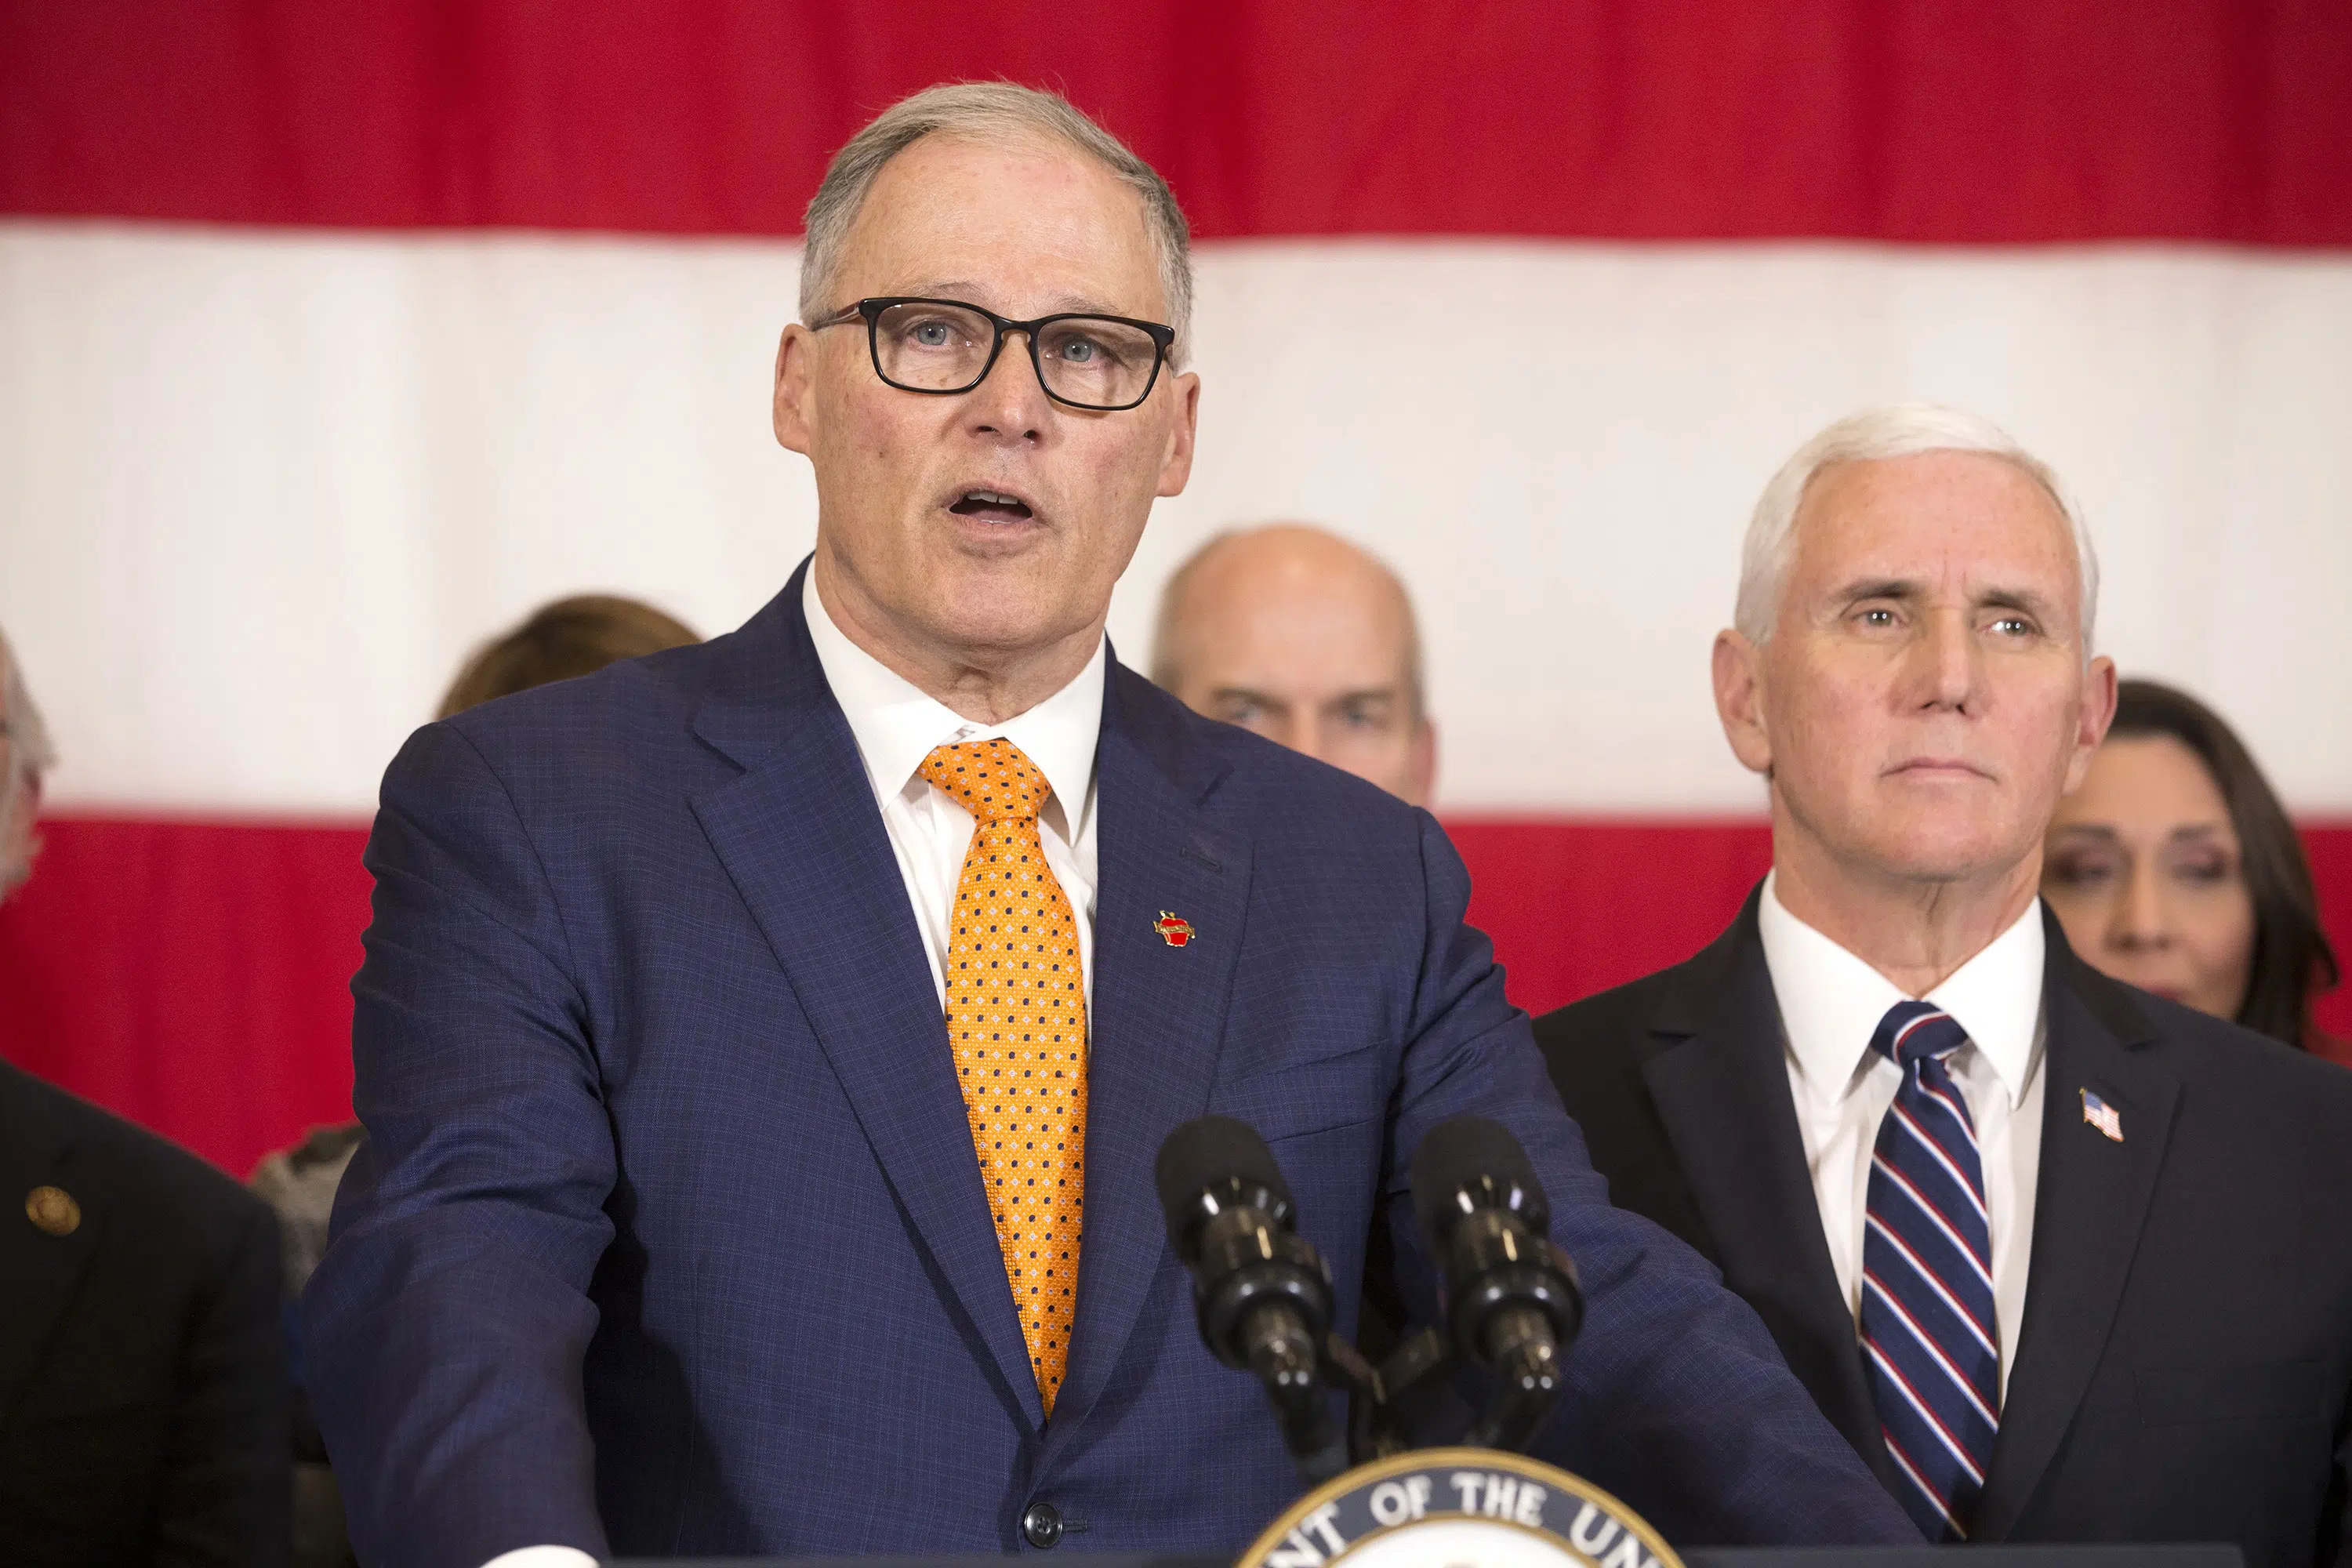 Inslee Announces Equity Package in Washington State Budget